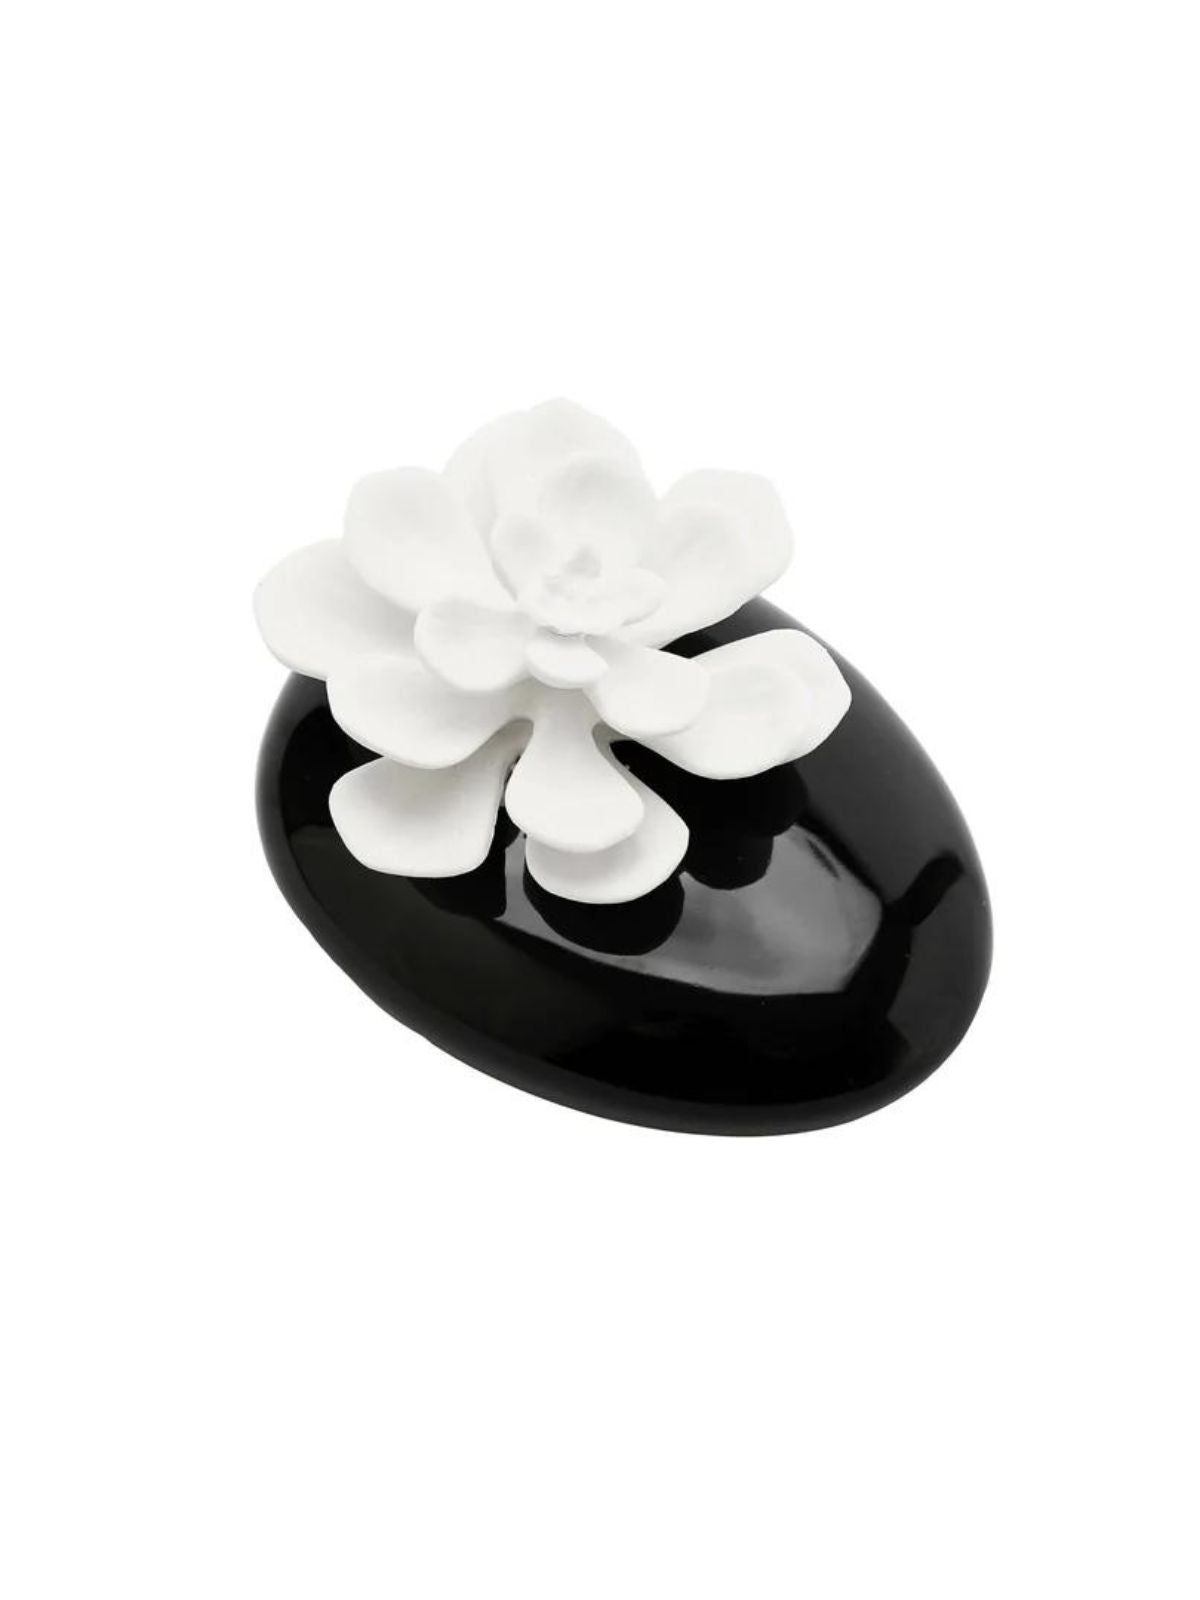 Dispense the scent of Iris and Rose into the air with this Black Diffuser with White Dimensional Flower.